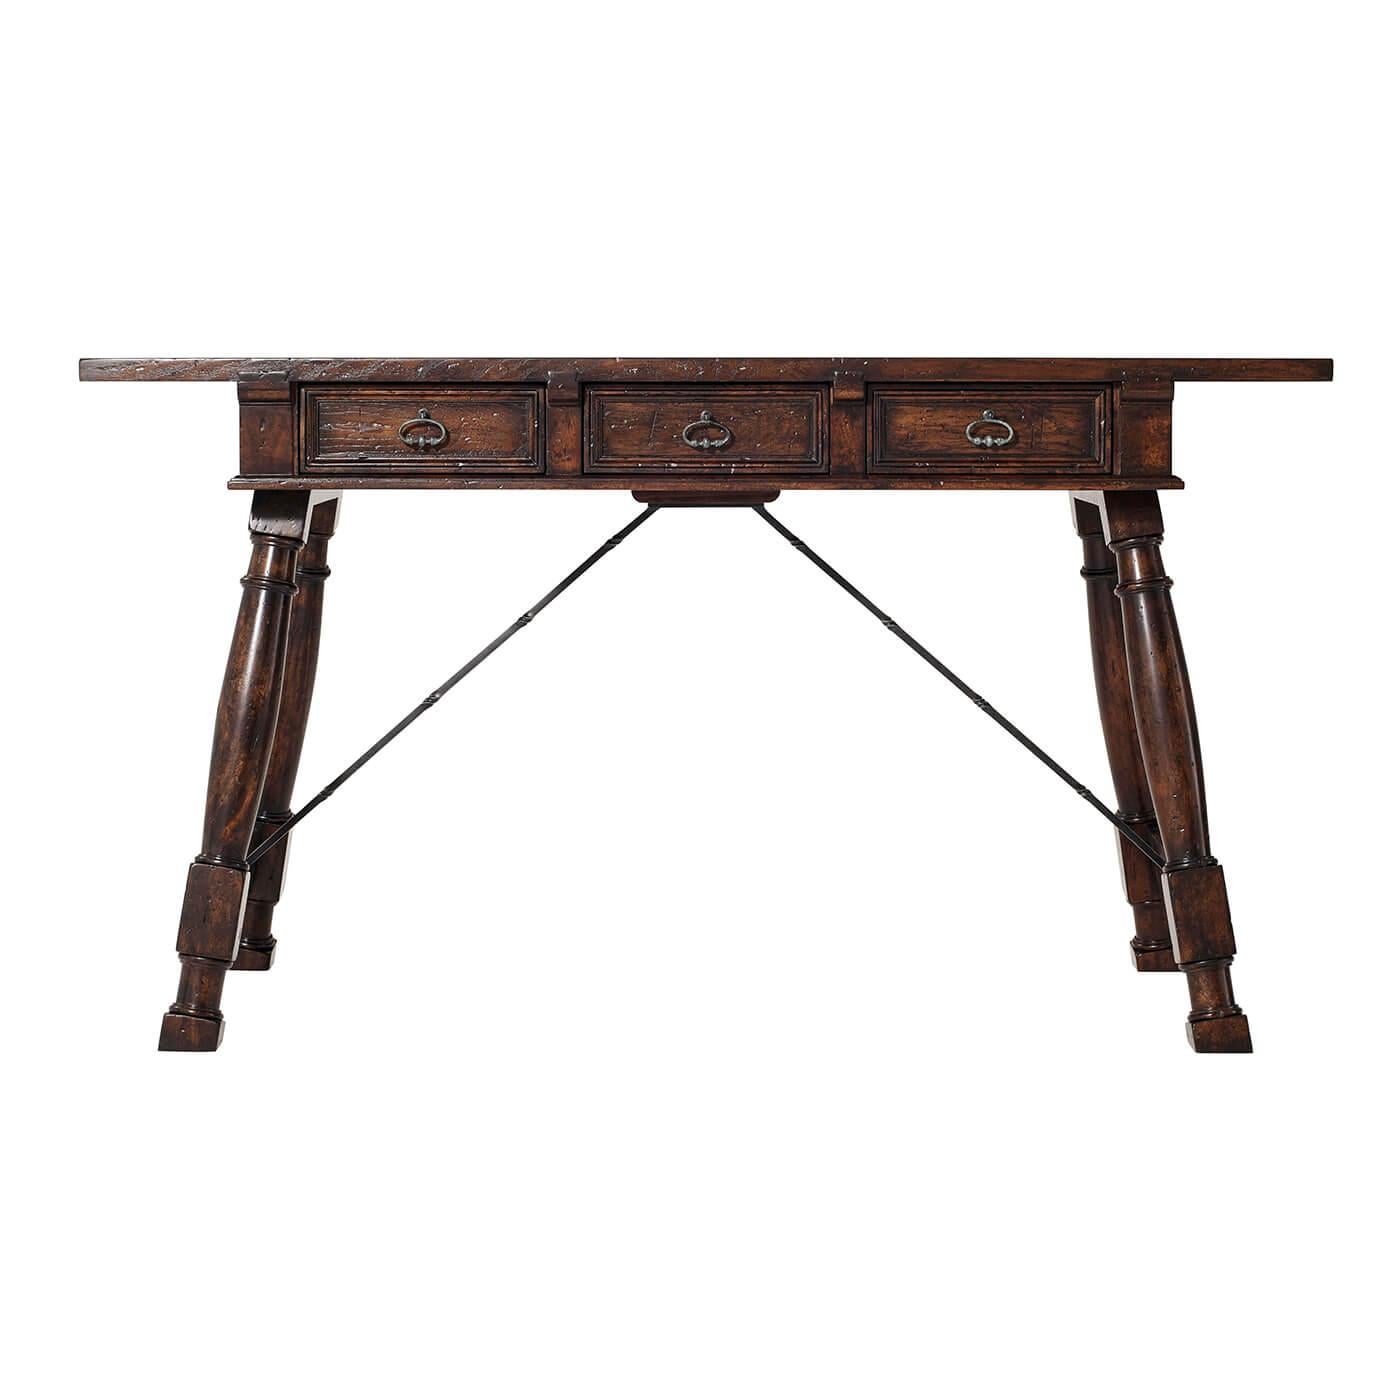 A Rustic country reclaimed oak and mahogany trestle desk, the planked rectangular top above a frieze with three recessed panel drawers, on turned column splayed end supports secured by iron stretchers.

Dimensions: 52